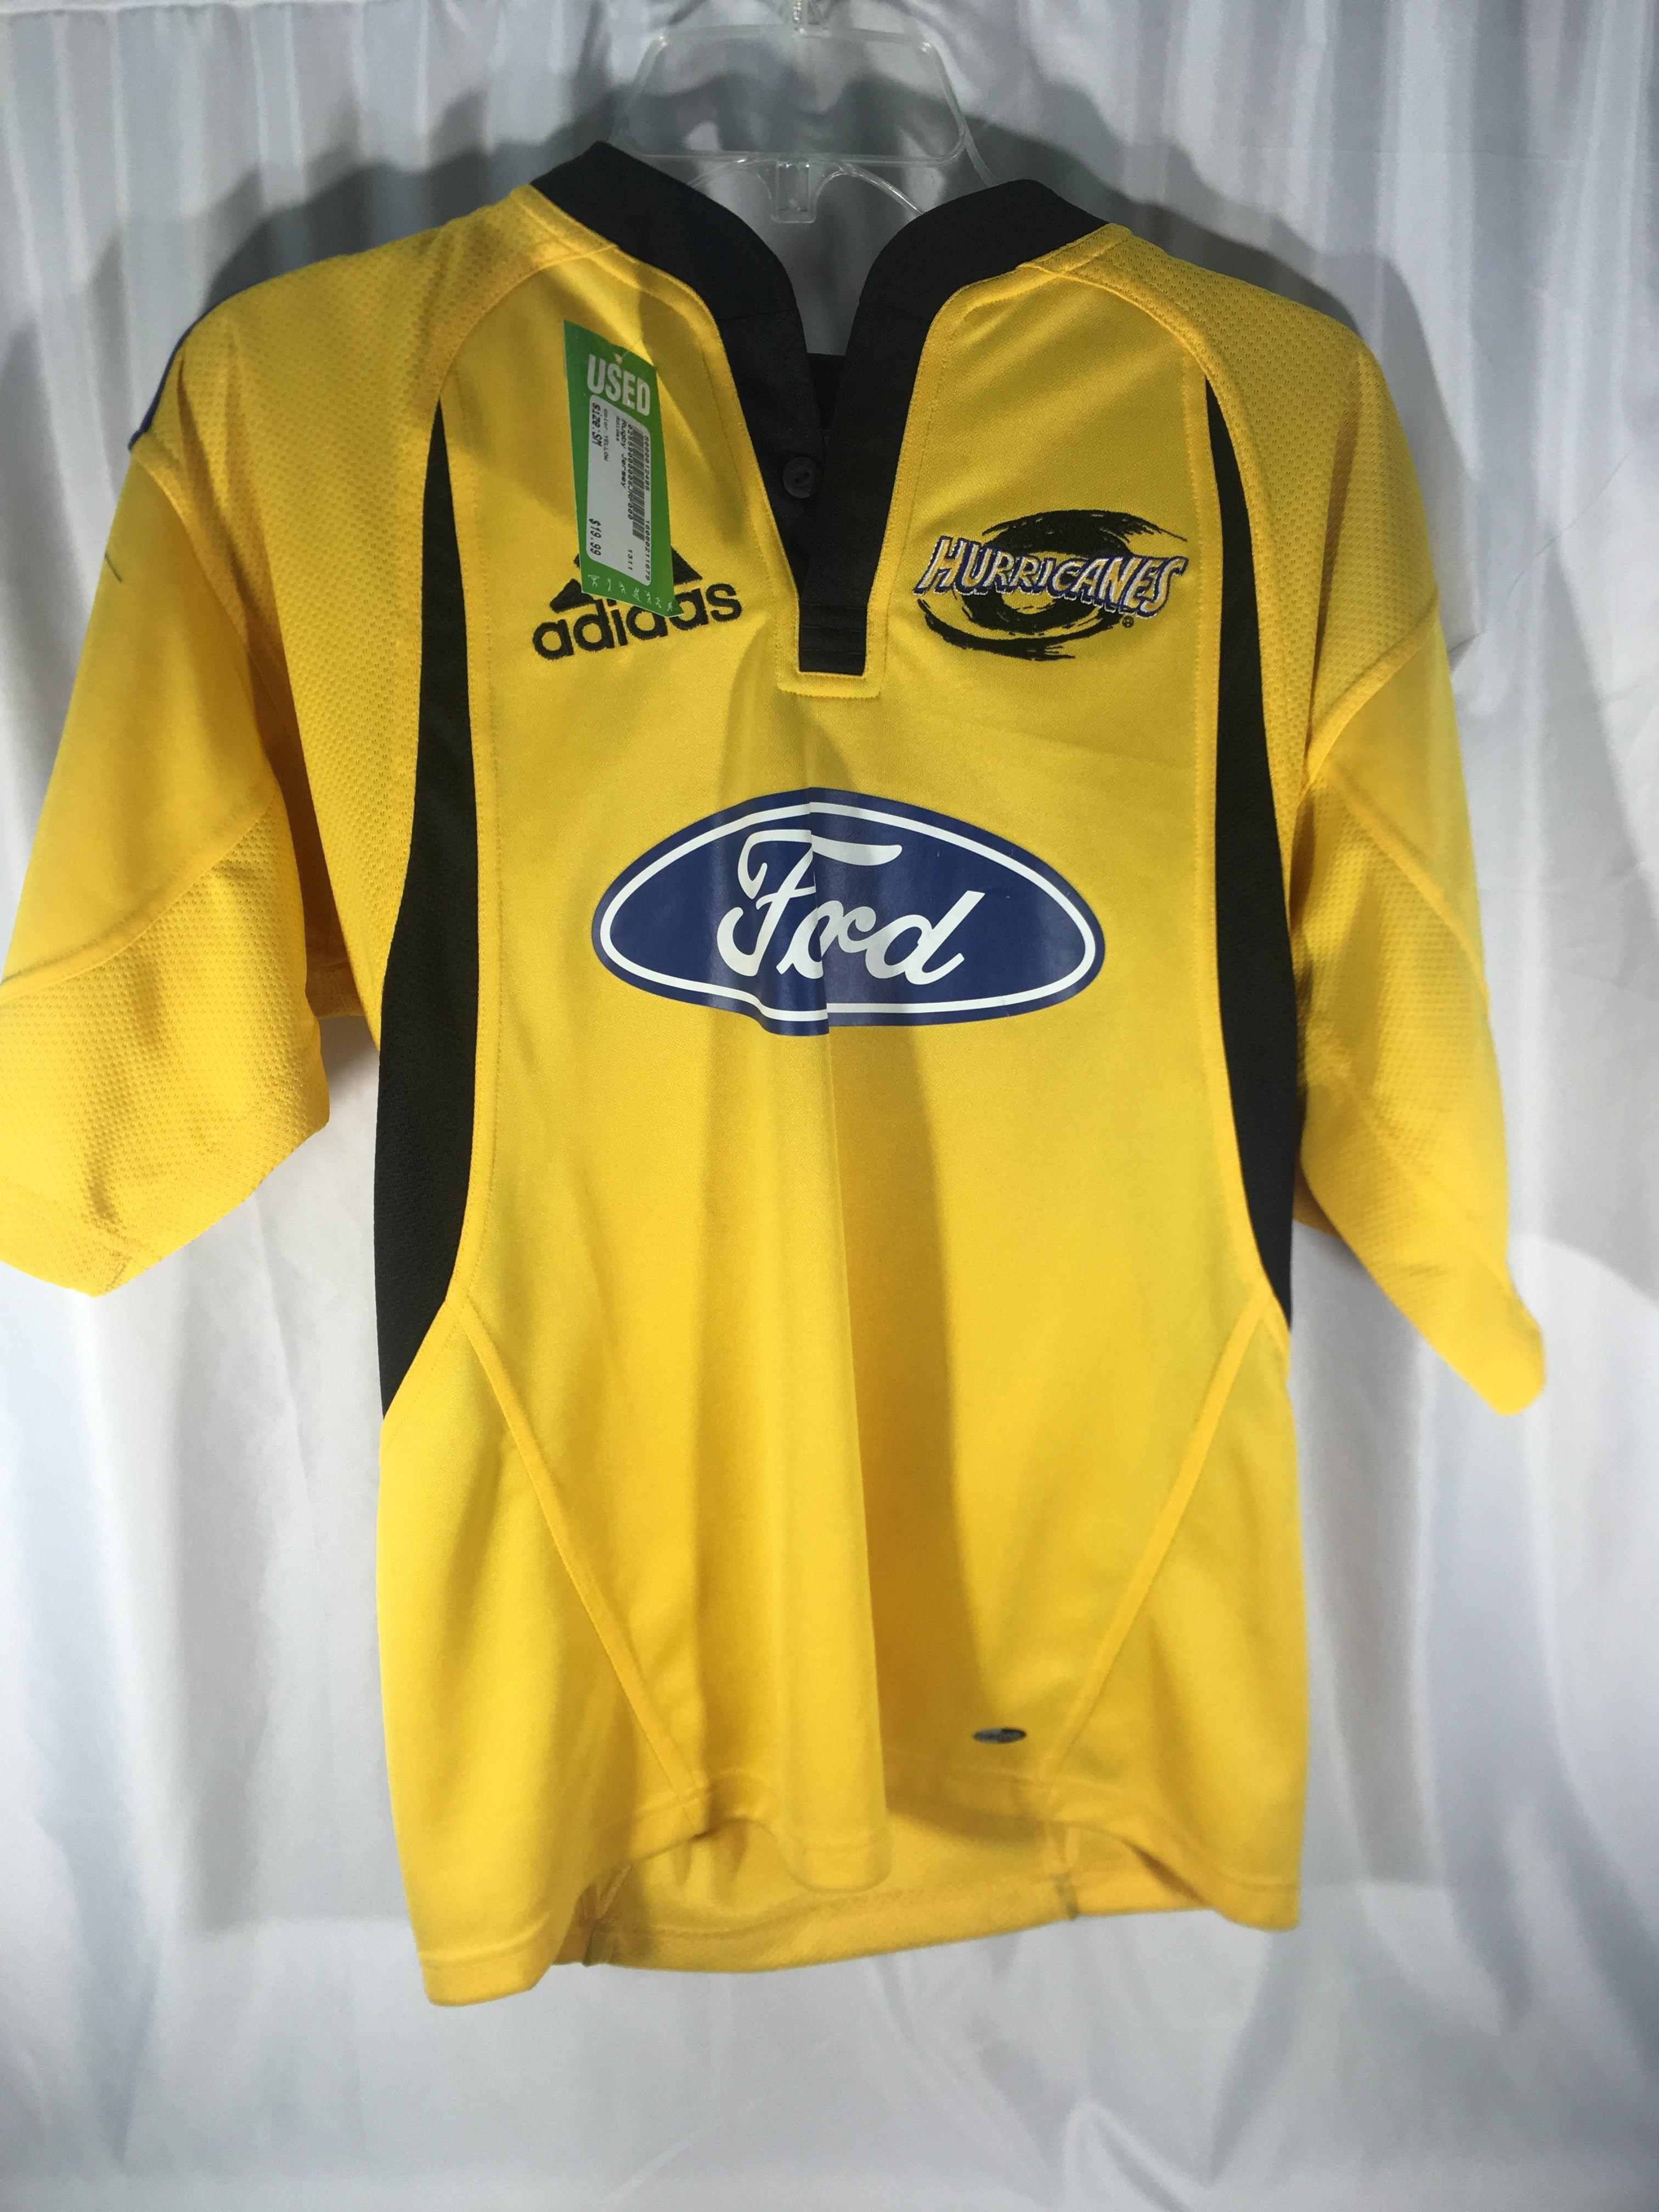 second hand rugby jerseys